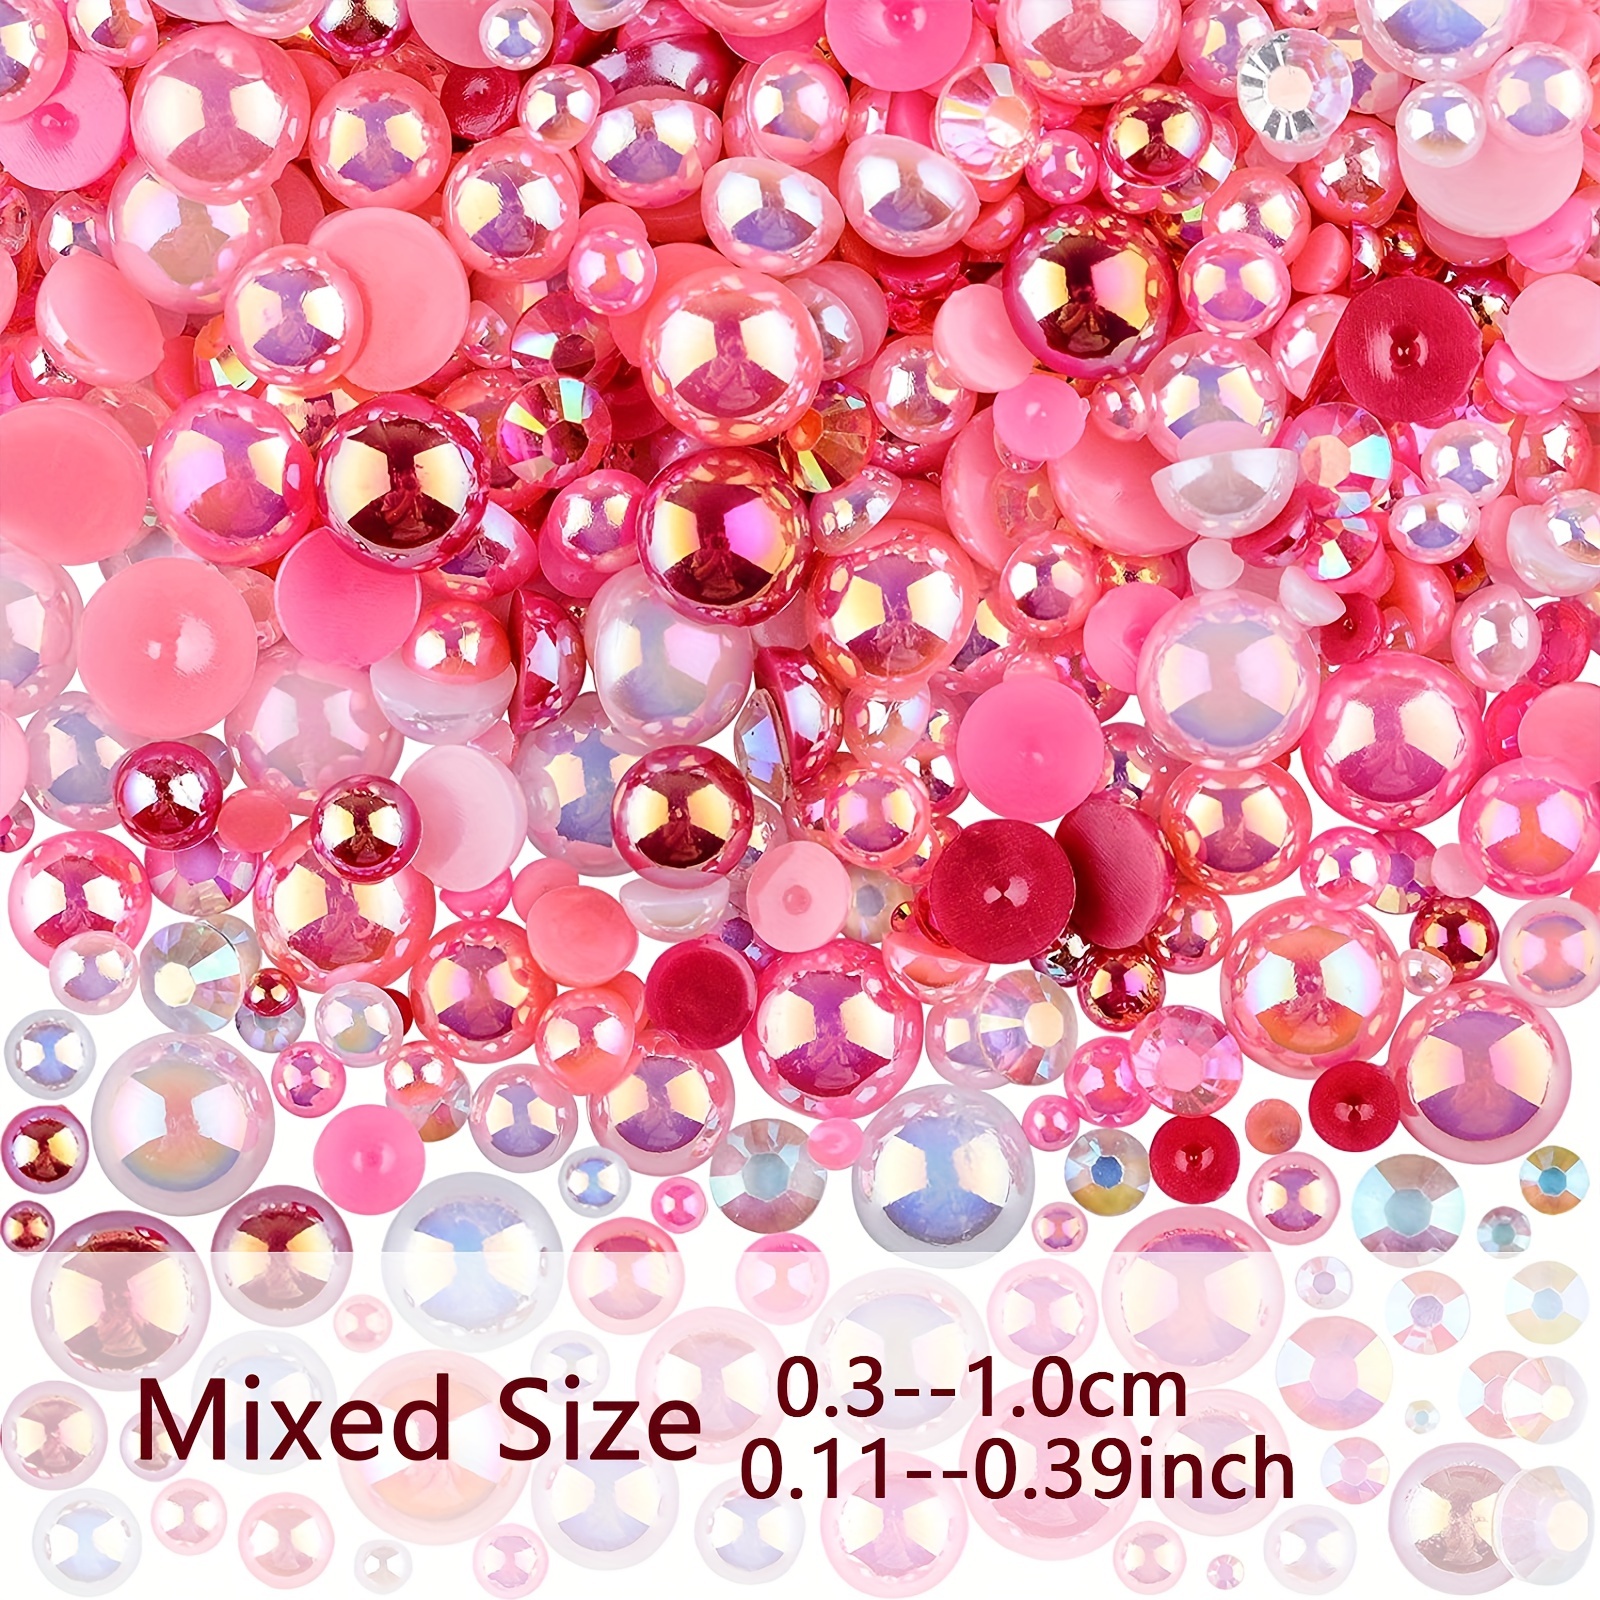  Towenm 60g Mix Pearls and Rhinestones for Crafts, Flatback  Rhinestones and Pearls for Tumblers Shoes Nails Face Art, 2mm-10mm Mixed  Sizes Bedazzling Half Pearls and Jelly Rhinestones, Pinks